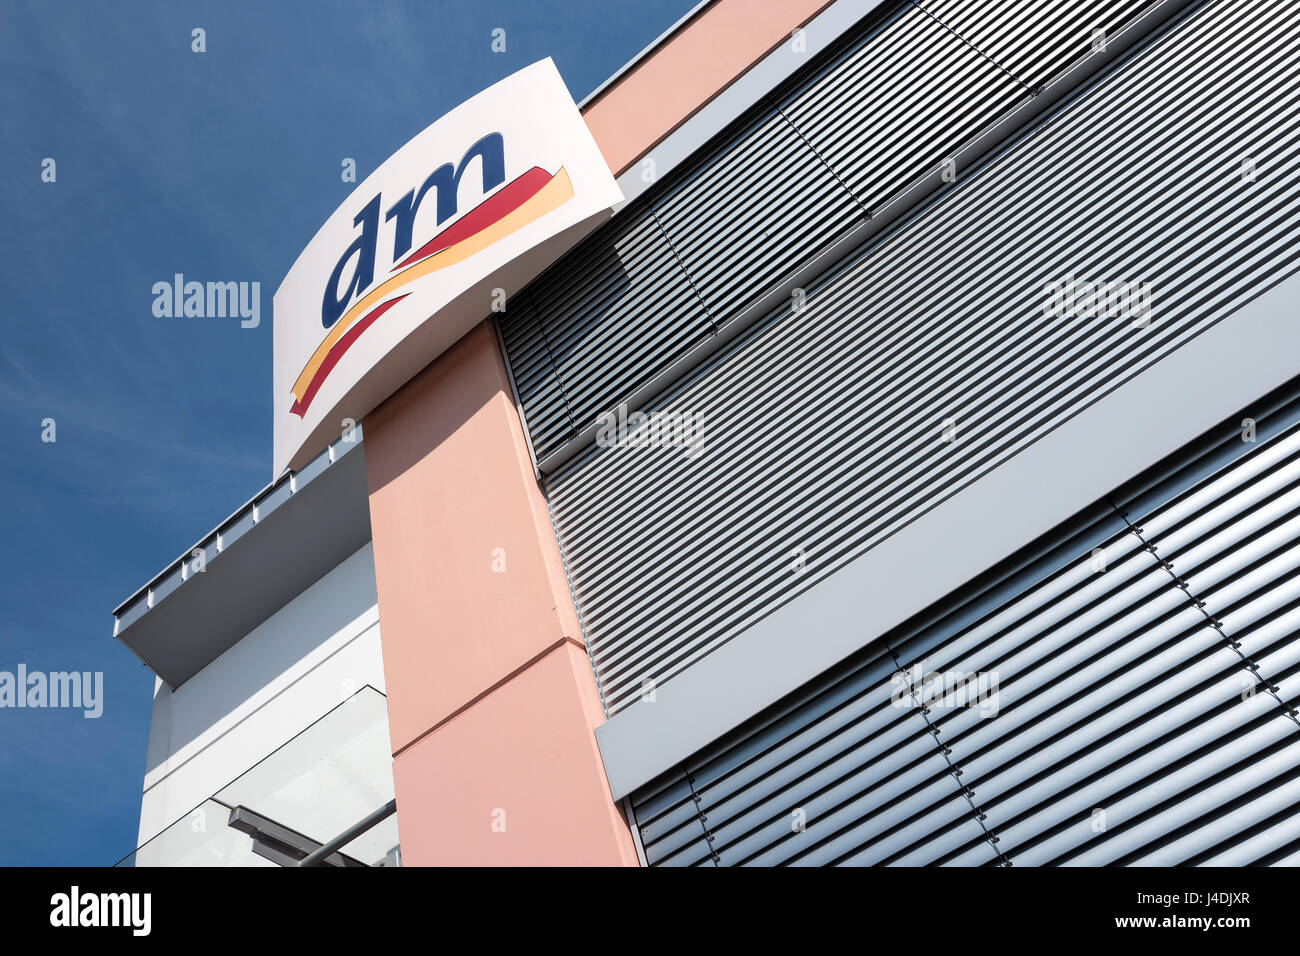 dm sign at branch. dm-drogerie markt is a German chain of retail stores, that sells cosmetics, healthcare items, household products and health food. Stock Photo